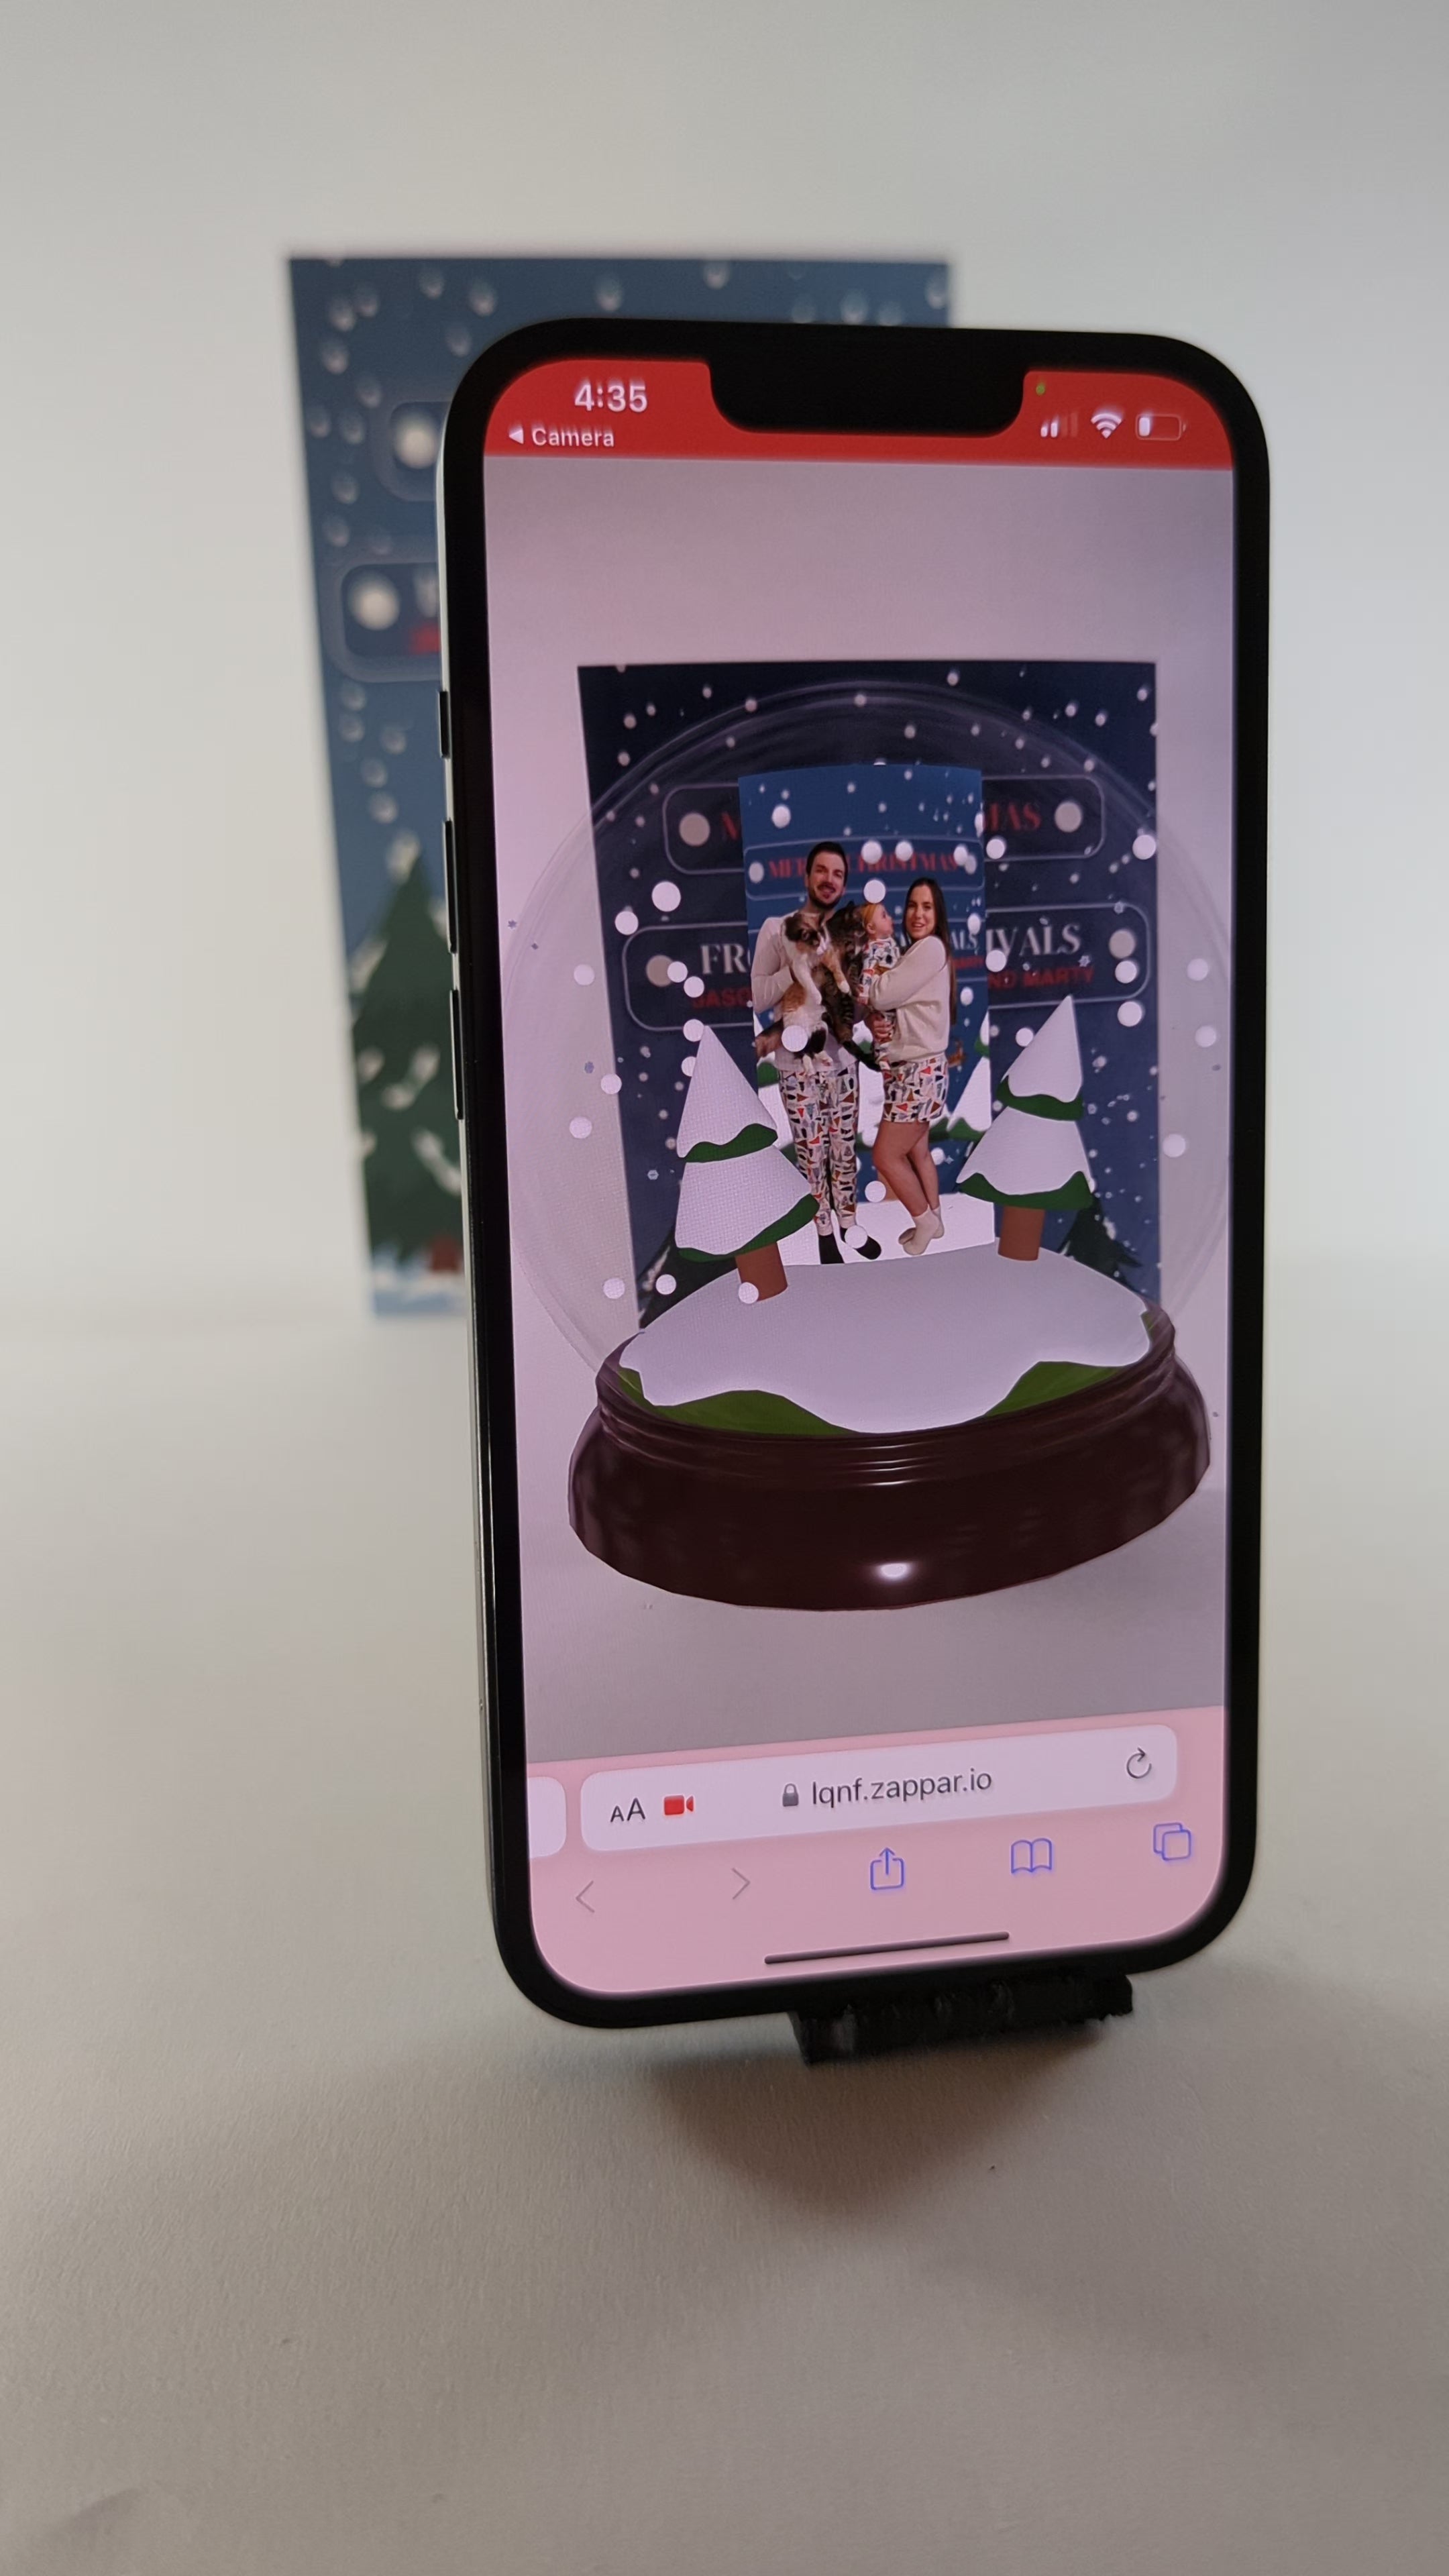 Interactive Augmented Reality Holiday Cards